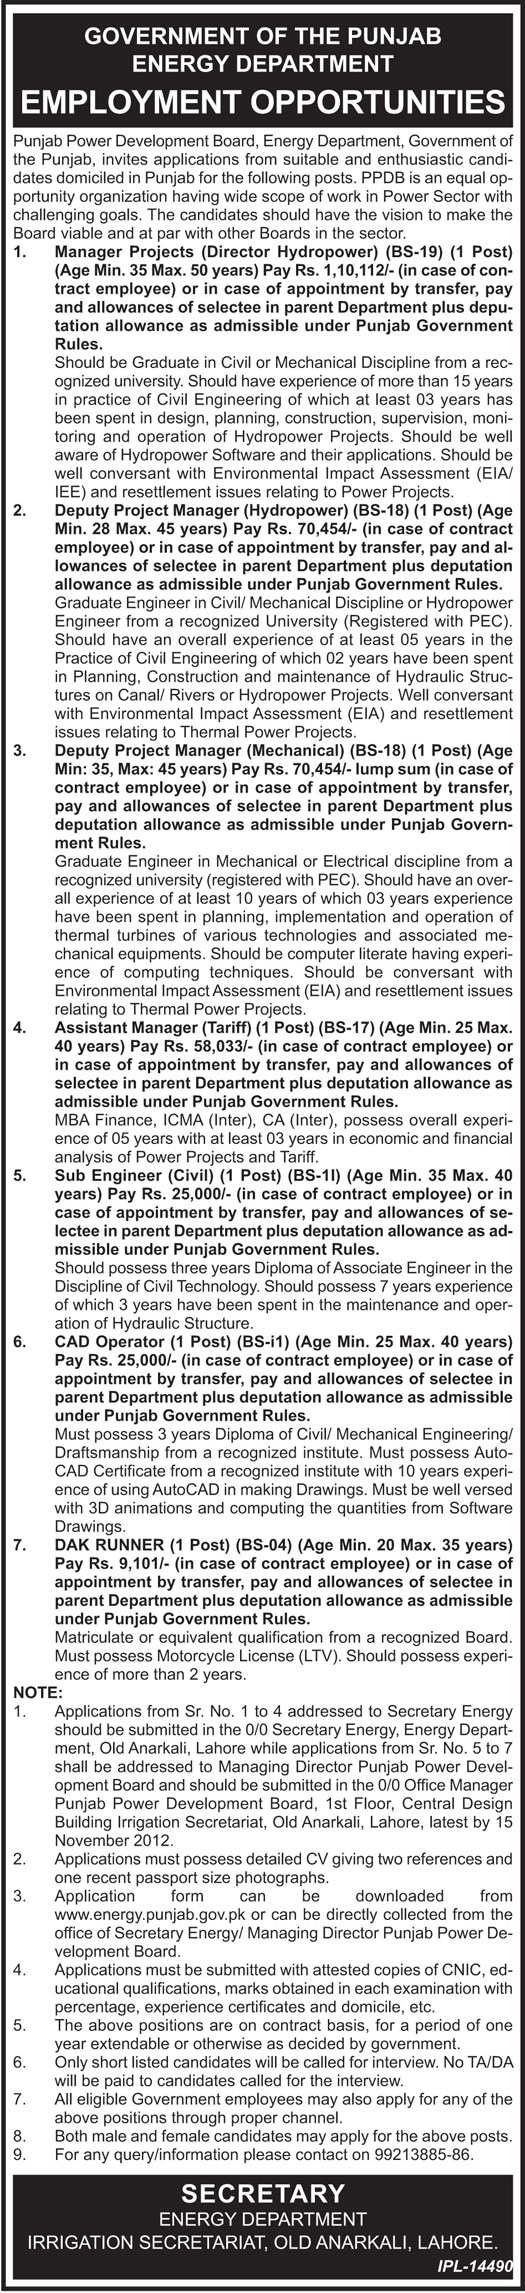 Energy Department Punjab Government Requires Managers & Engineers